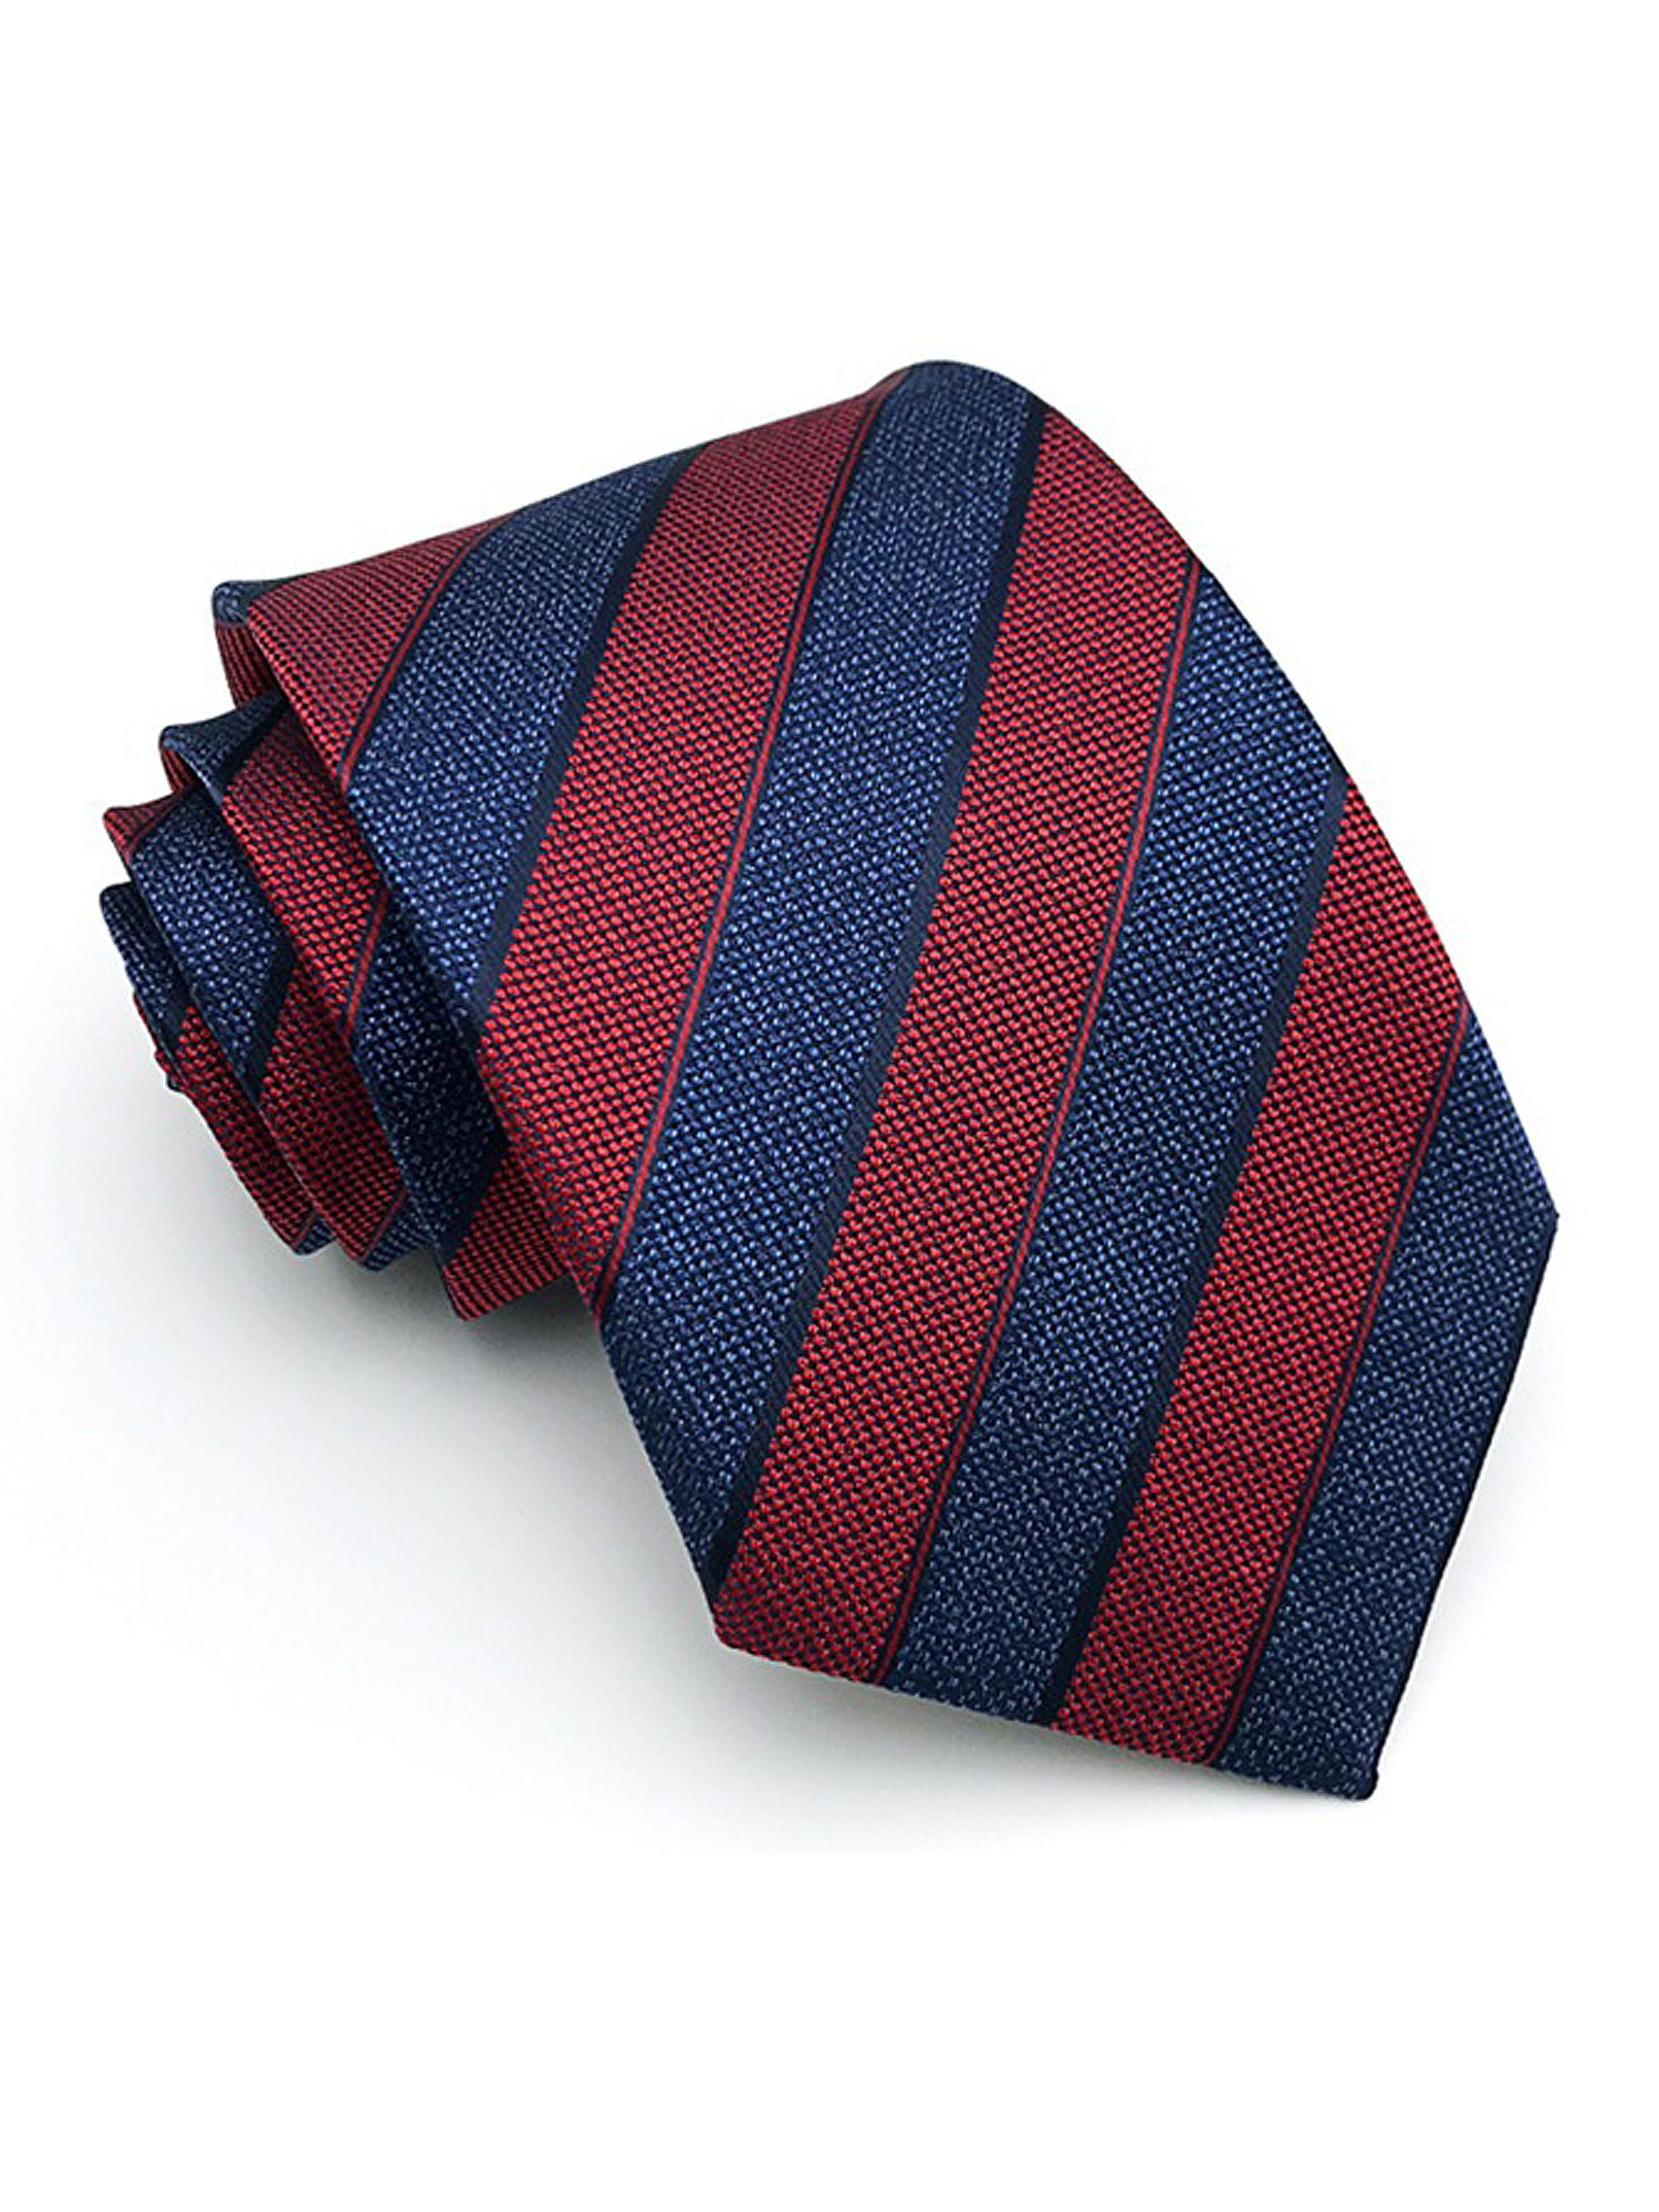 Awning Stripe Tie - Navy Blue with Red Line - Zeve Shoes